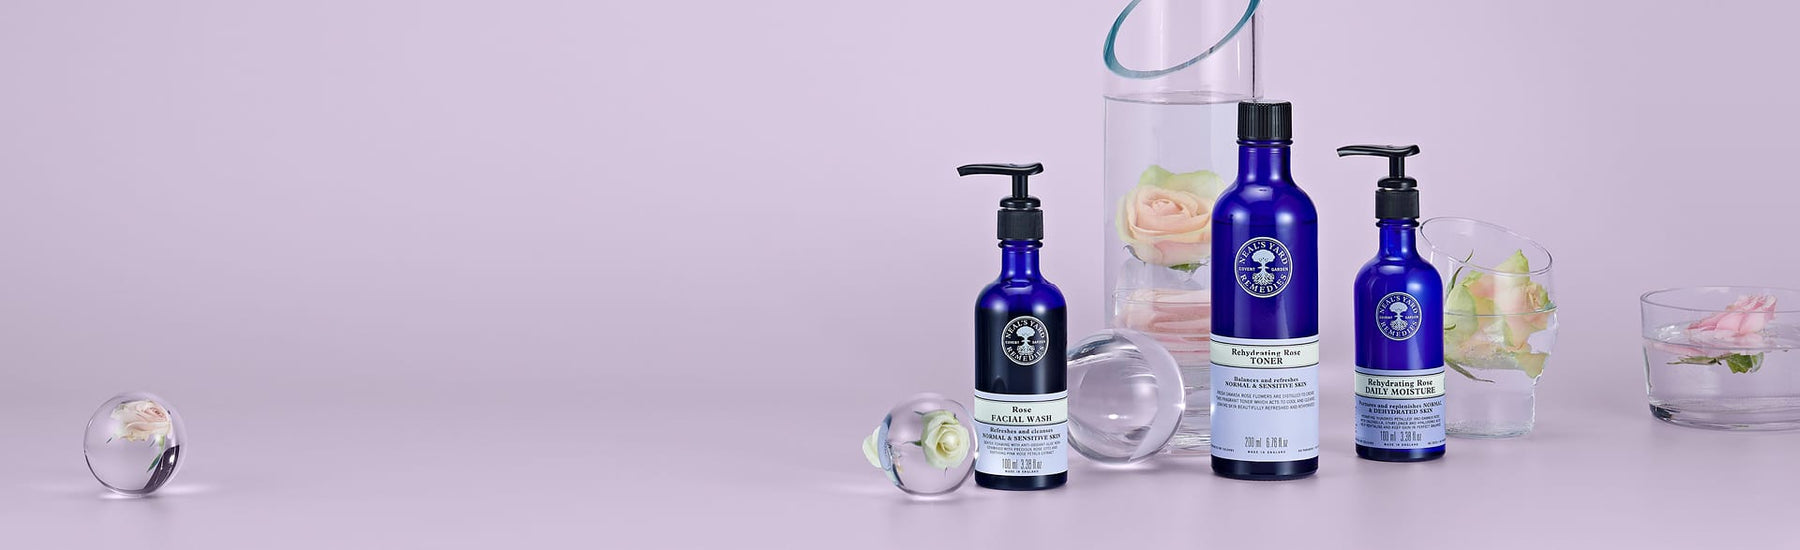 Picture of the Rehydrating Rose skincare range by Neal's Yard Remedies